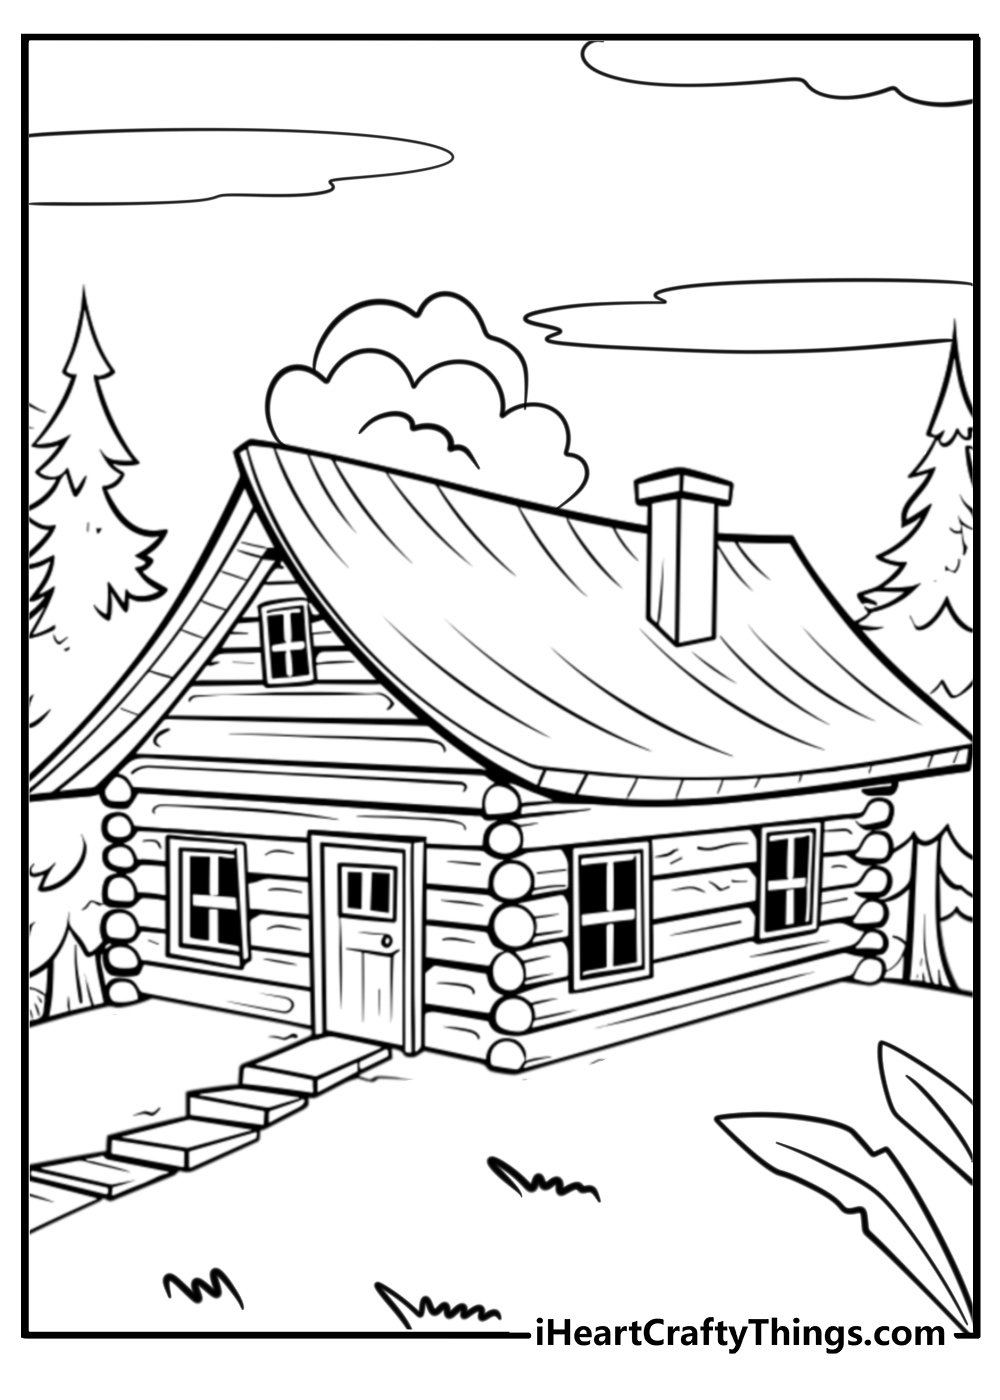 Cabin coloring pages for adults